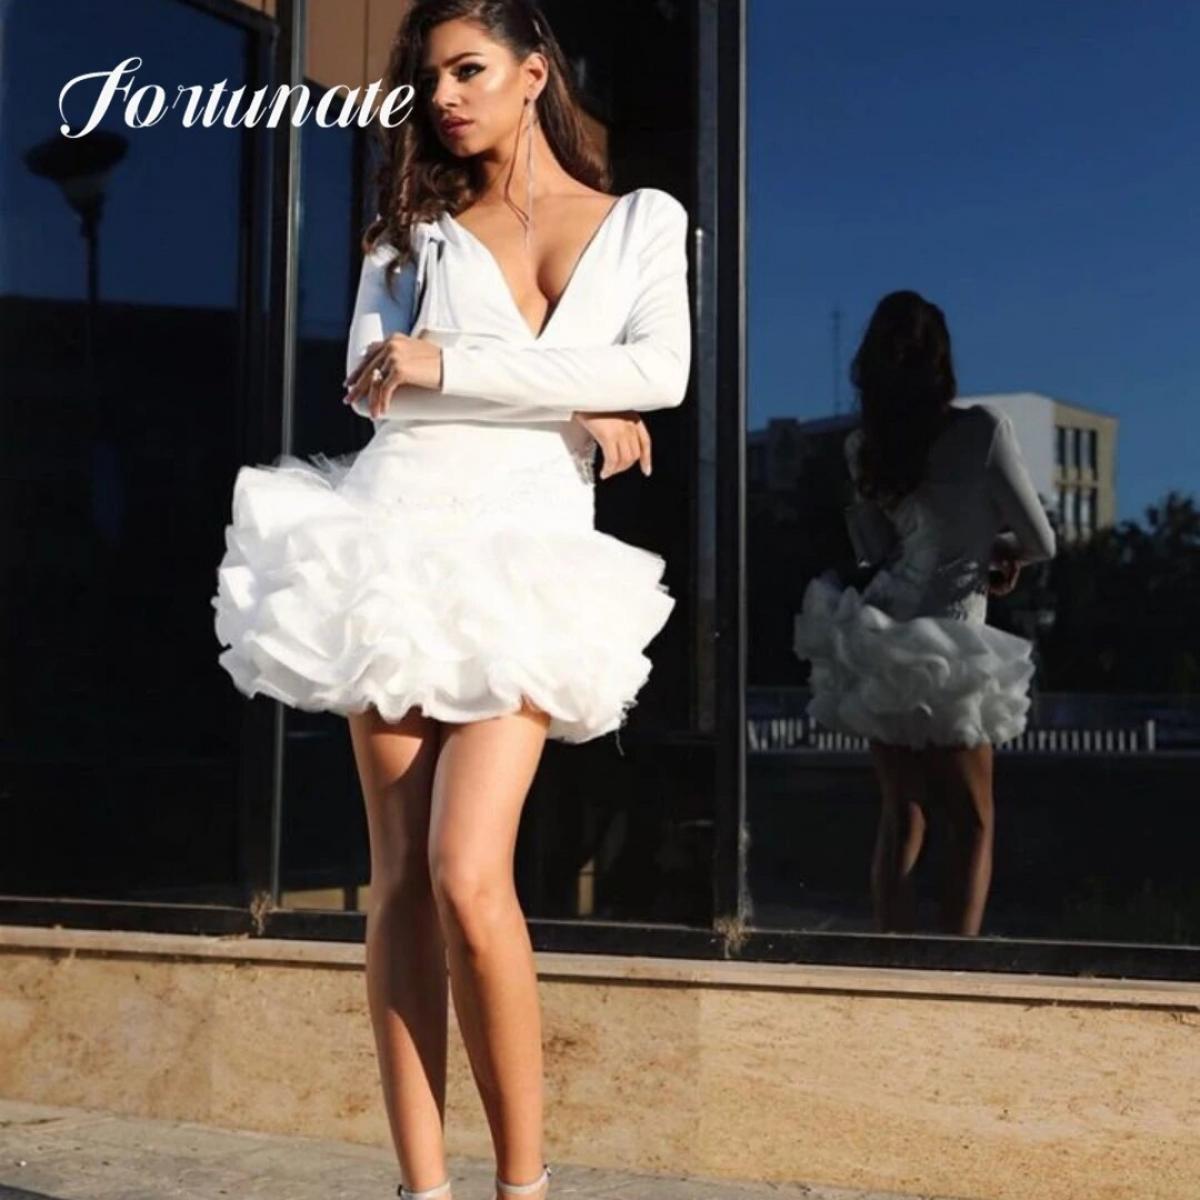 Youthful Short Ivory Quinceanera Dresses A Line Deep V Neck Cocktail Party Full Sleeve Evening Party Dress For Woman 202